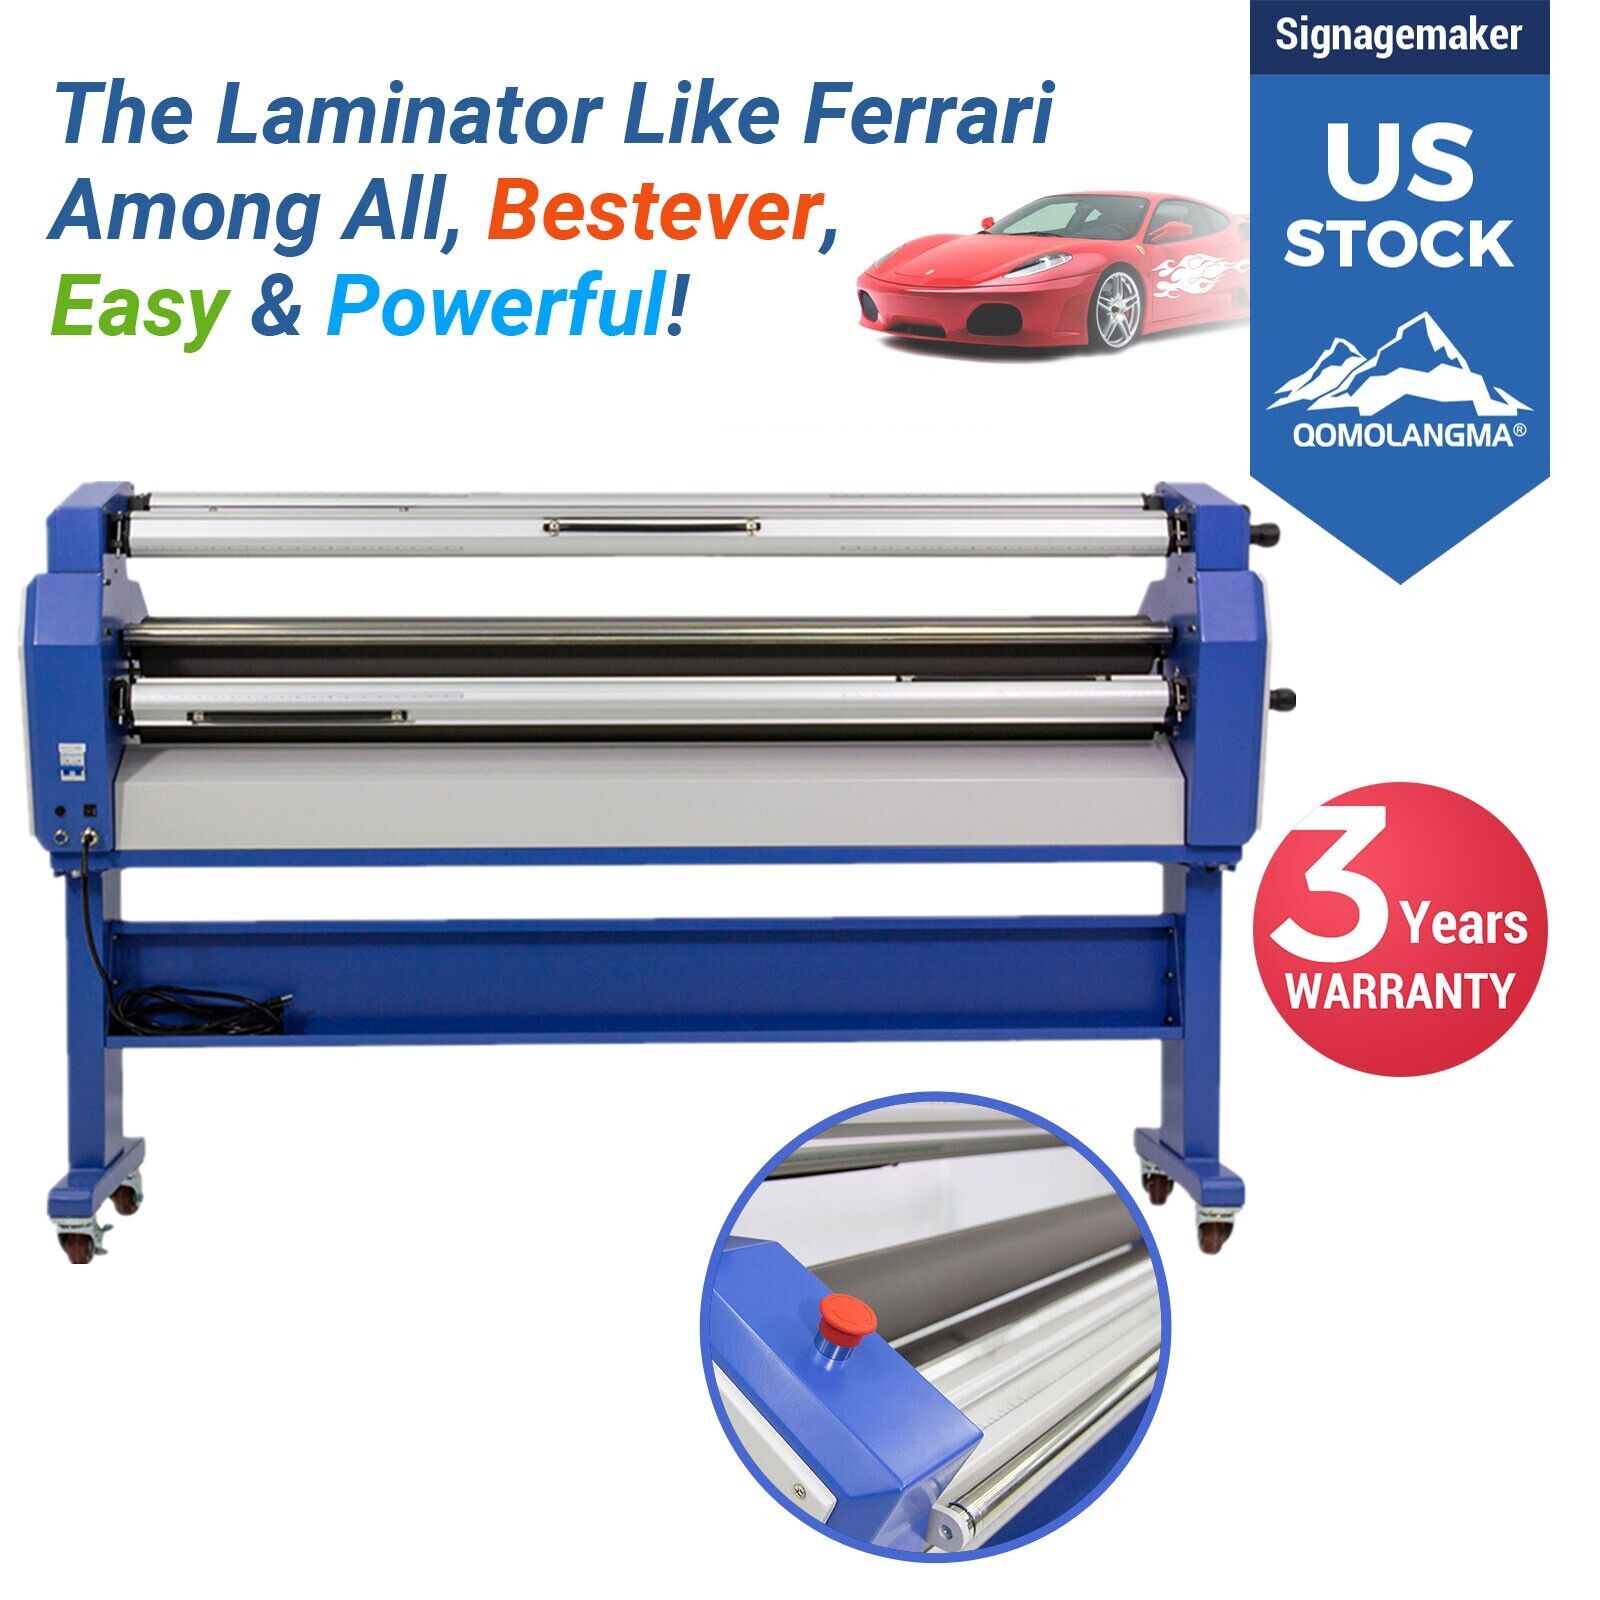 US Stock QOMOLANGMA 55in Full-auto Wide Format Cold Laminator with Heat Assisted